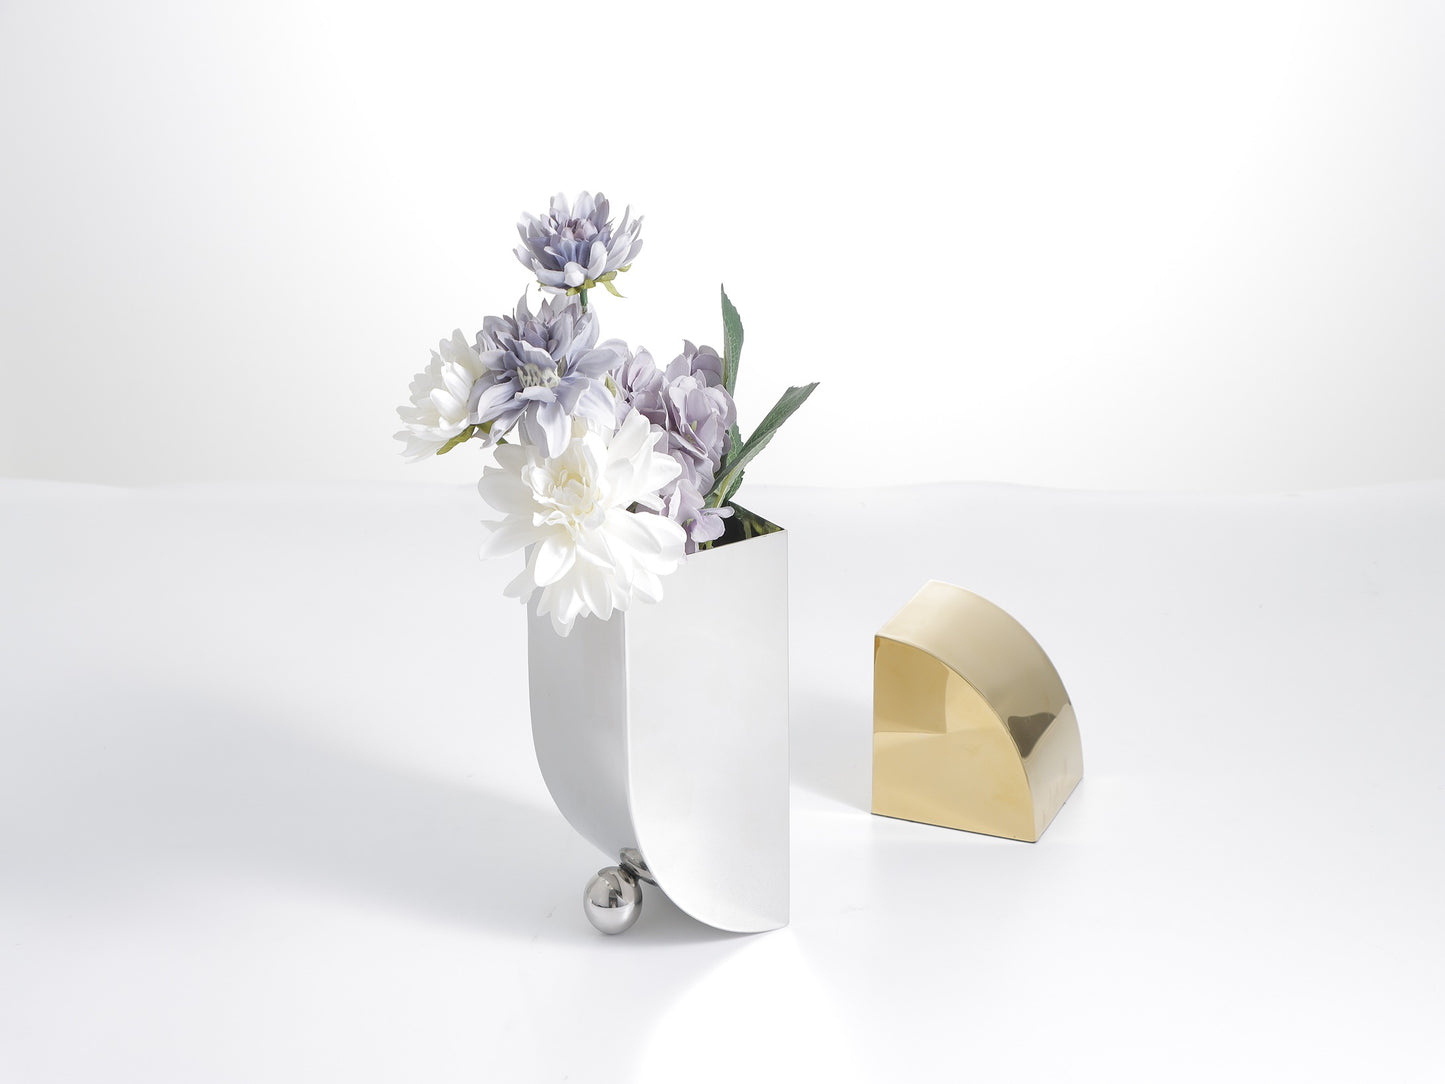 MODERN GOLD & SILVER BOOKEND